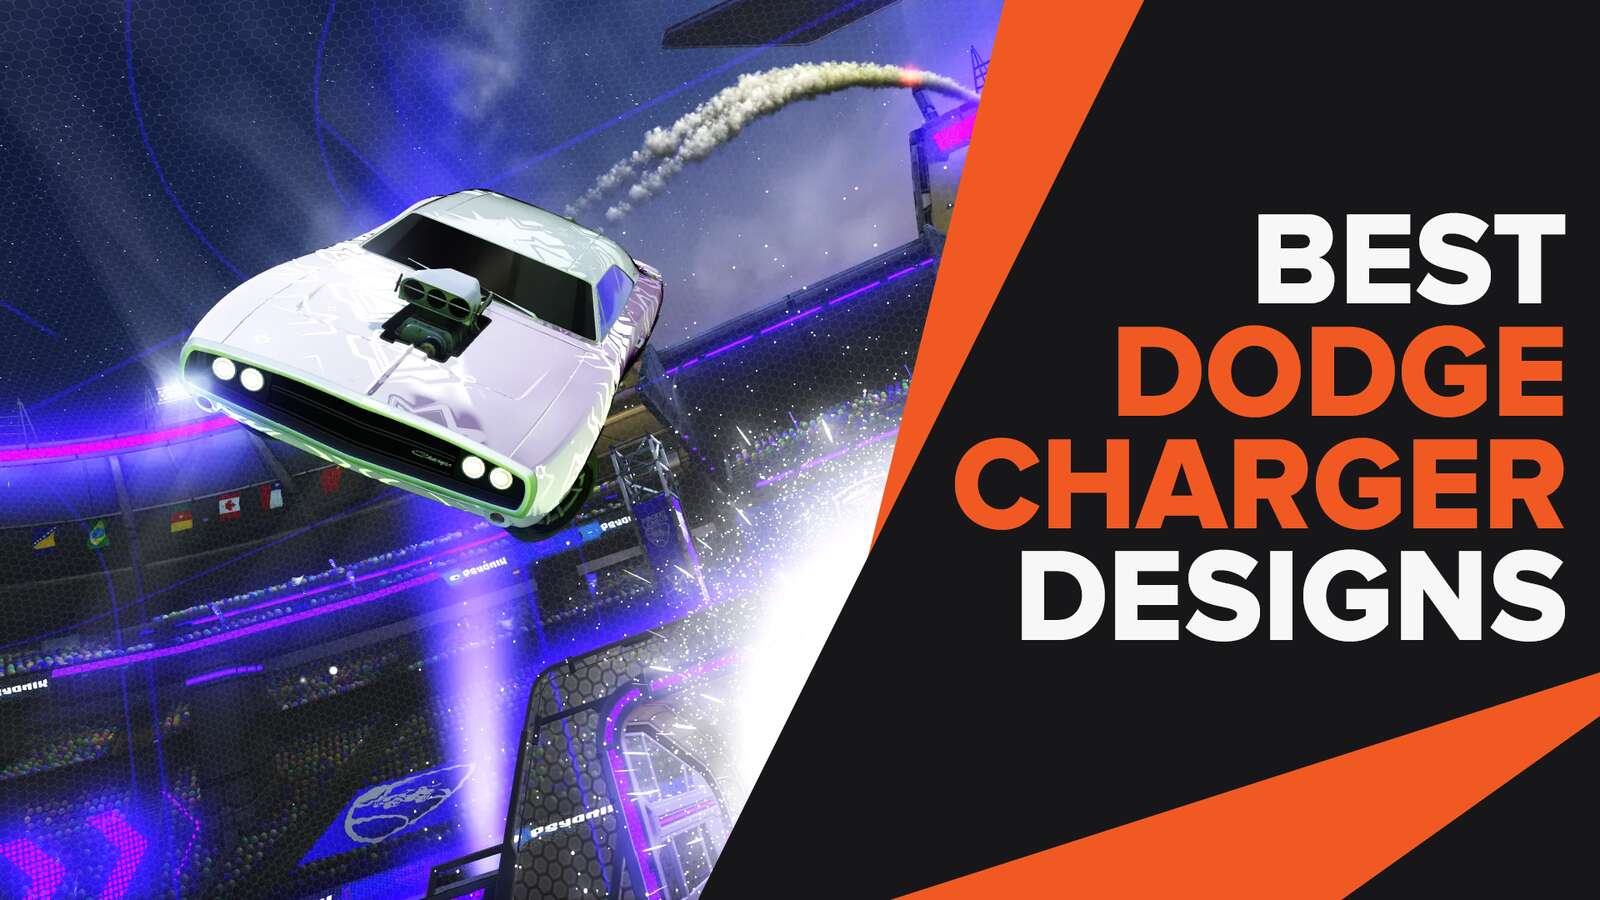 The Best Fast & Furious Dodge Charger Designs in Rocket League